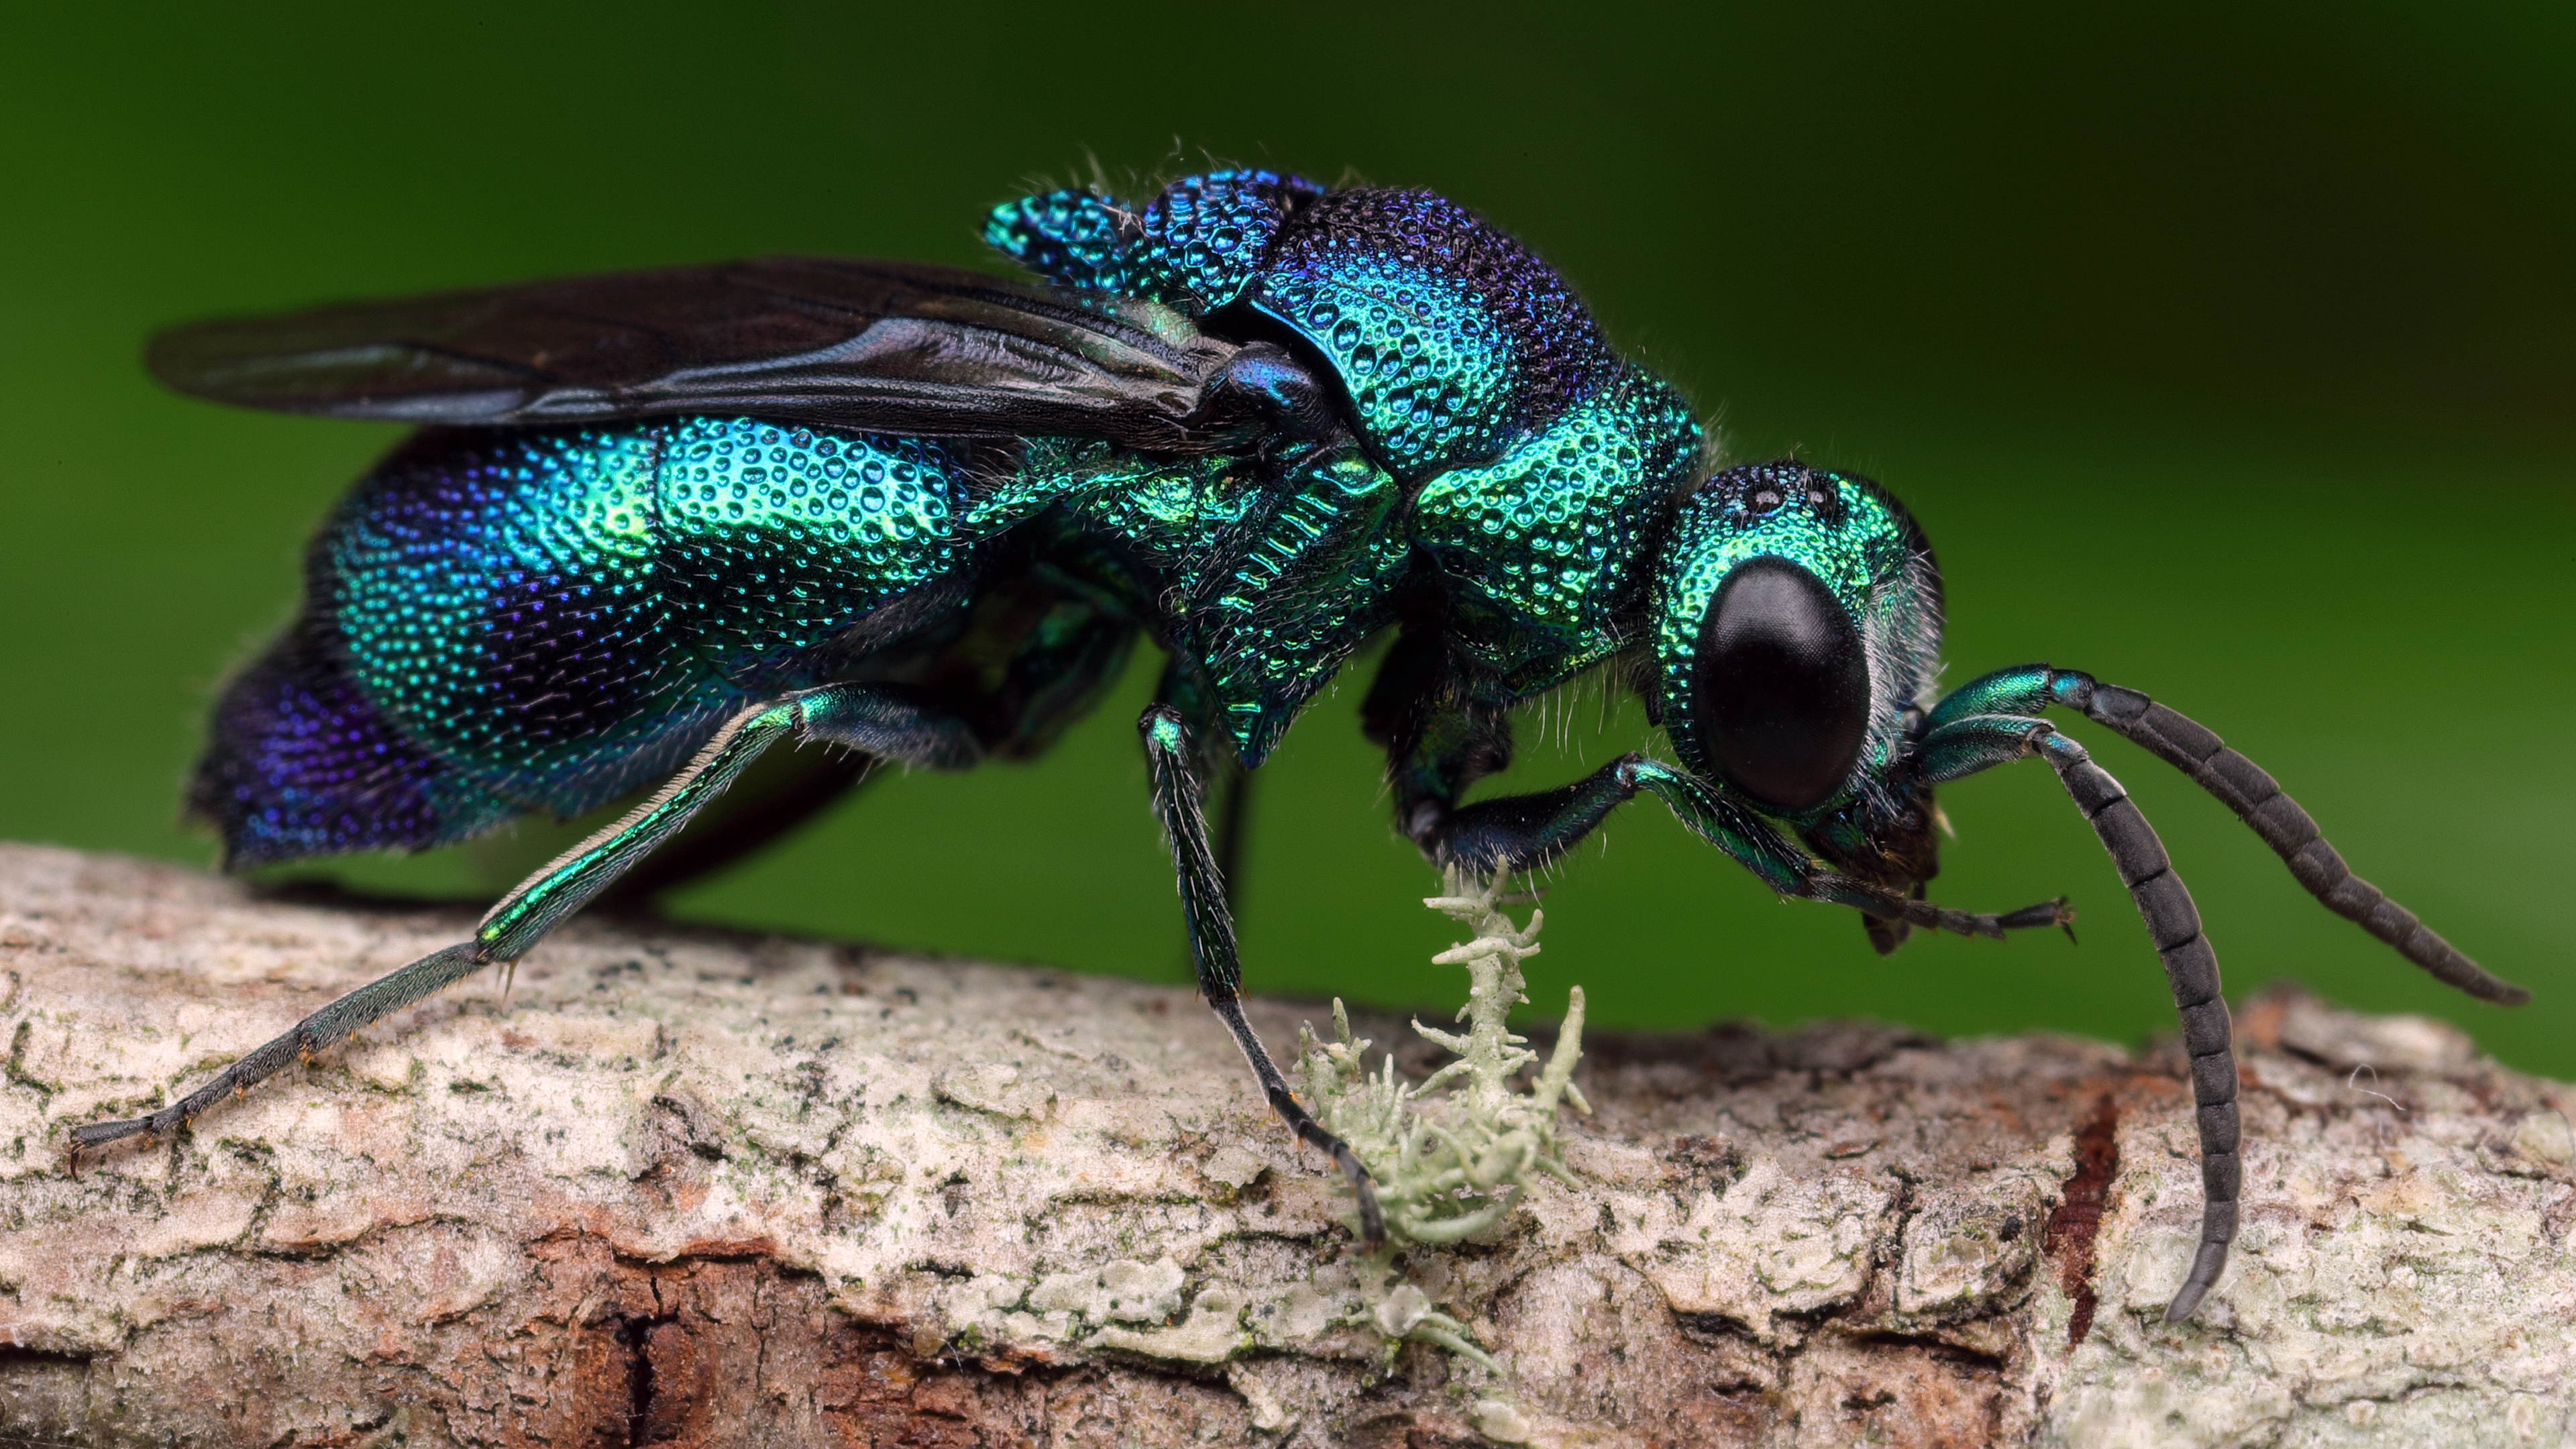 An unusual blue-colored wasp